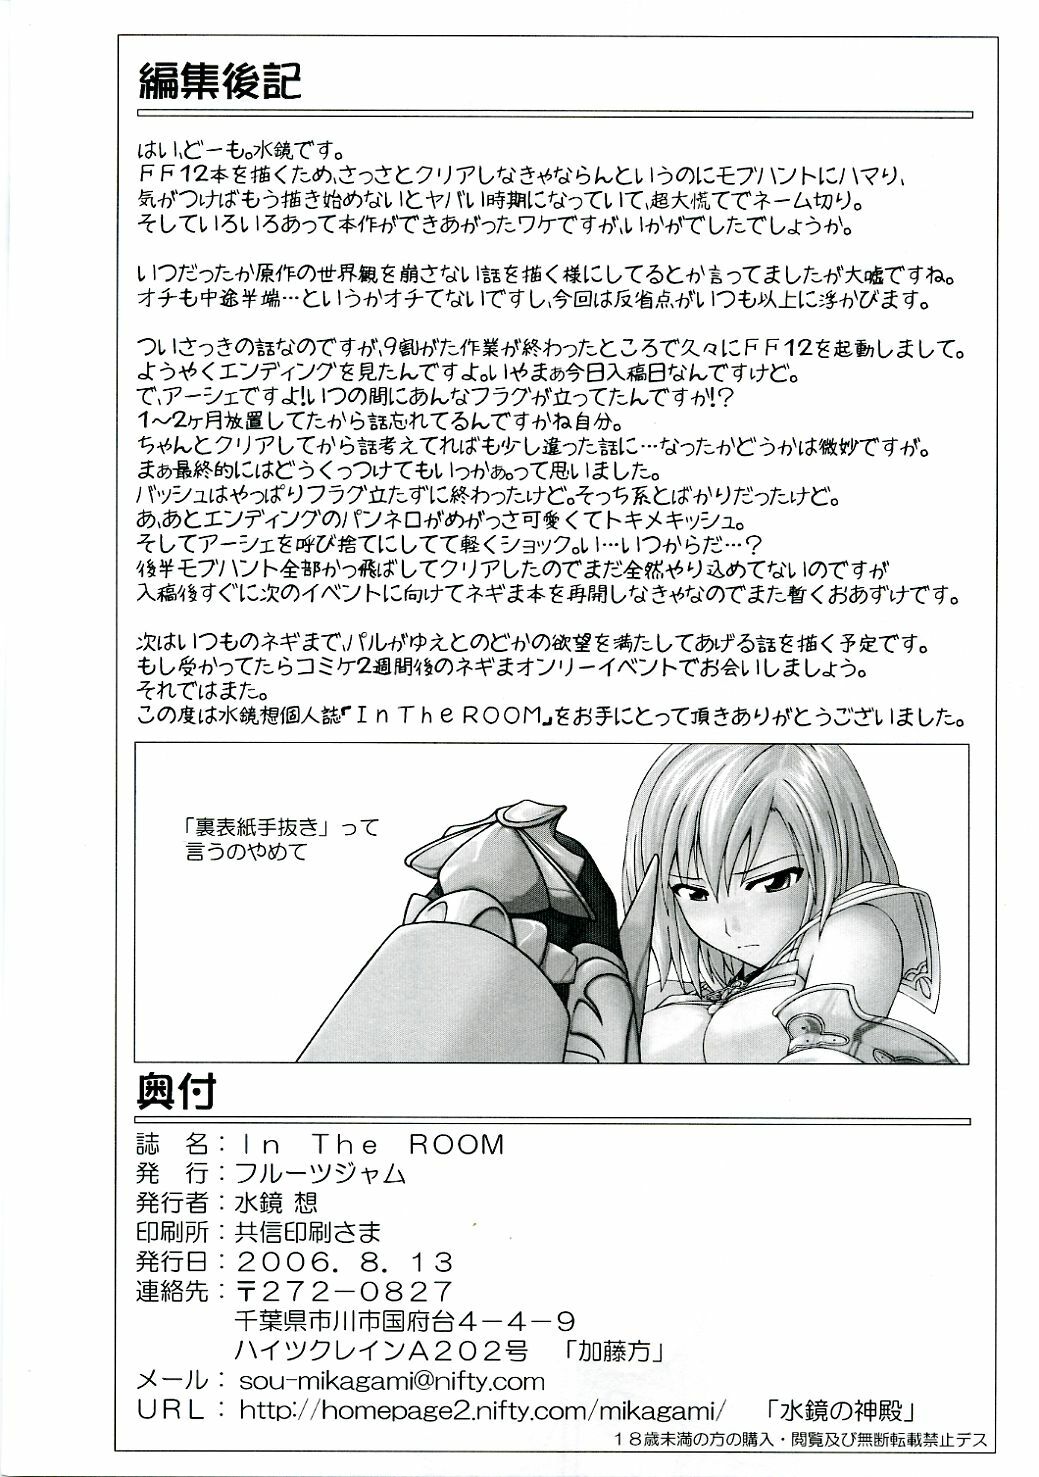 (C70) [FruitsJam (Mikagami Sou)] In The Room (Final Fantasy XII) page 25 full